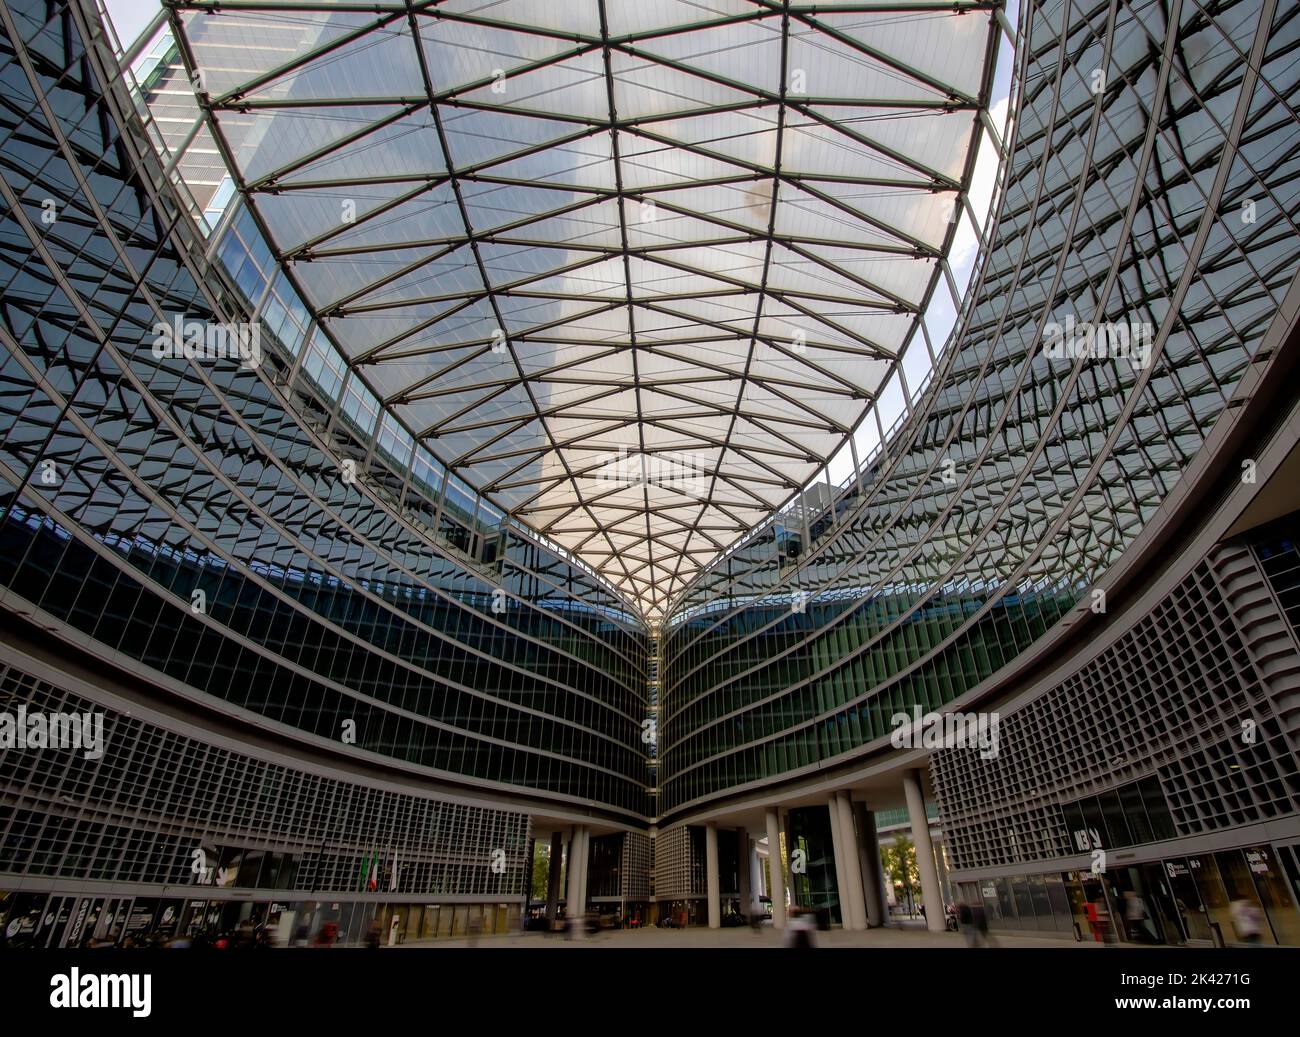 The magnificent roof of Palazzo Lombardia in Milan, Italy Stock Photo